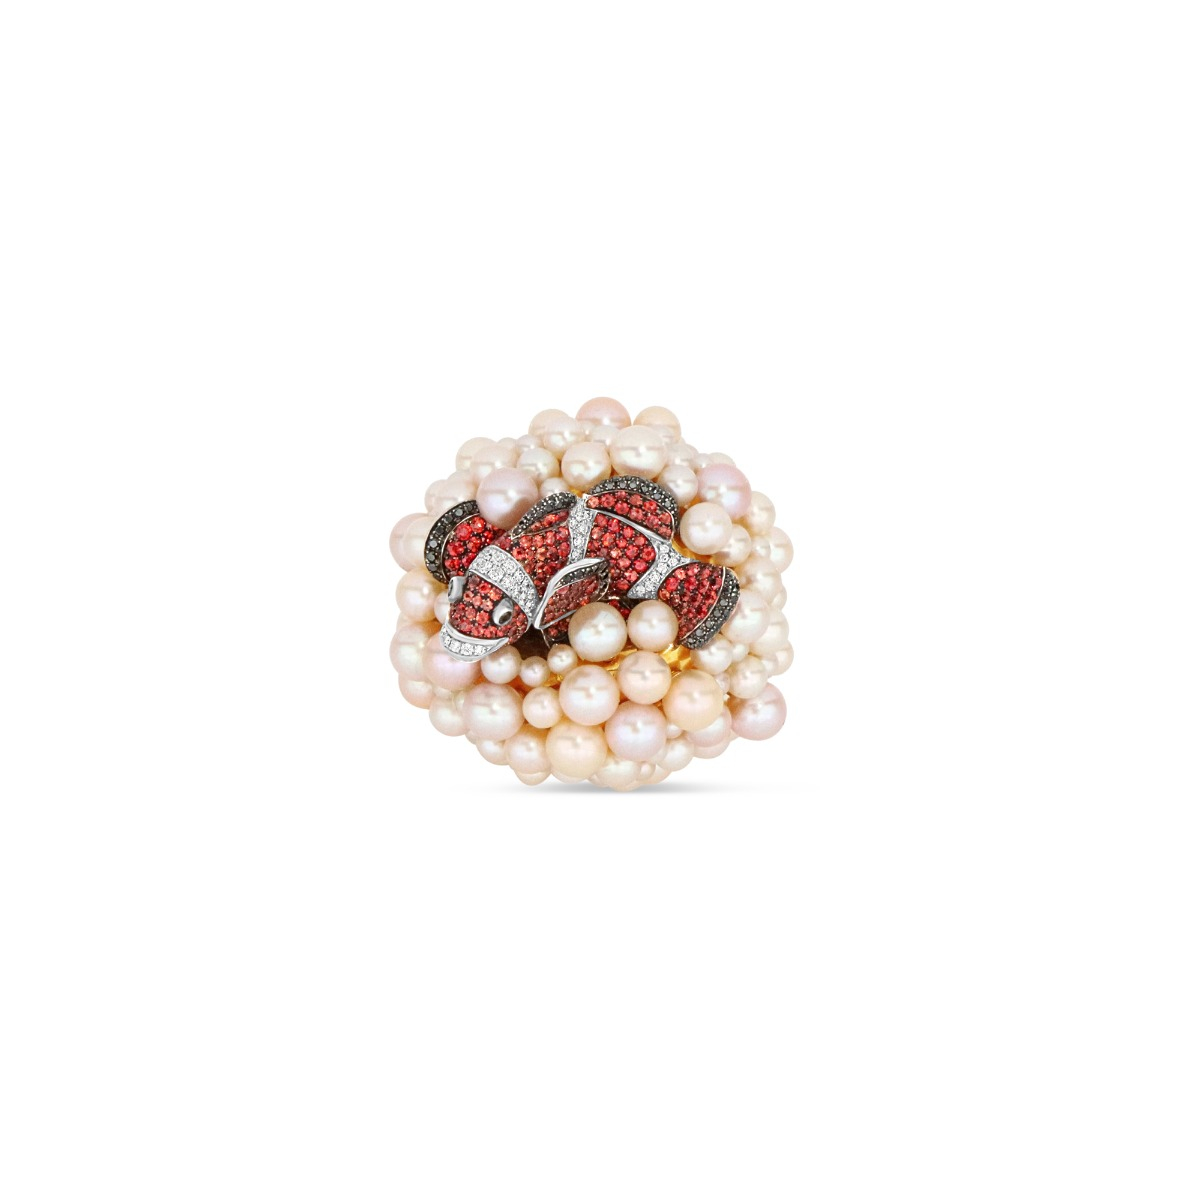 Nemo Cocktail Ring with Freshwater Pearls Anemone